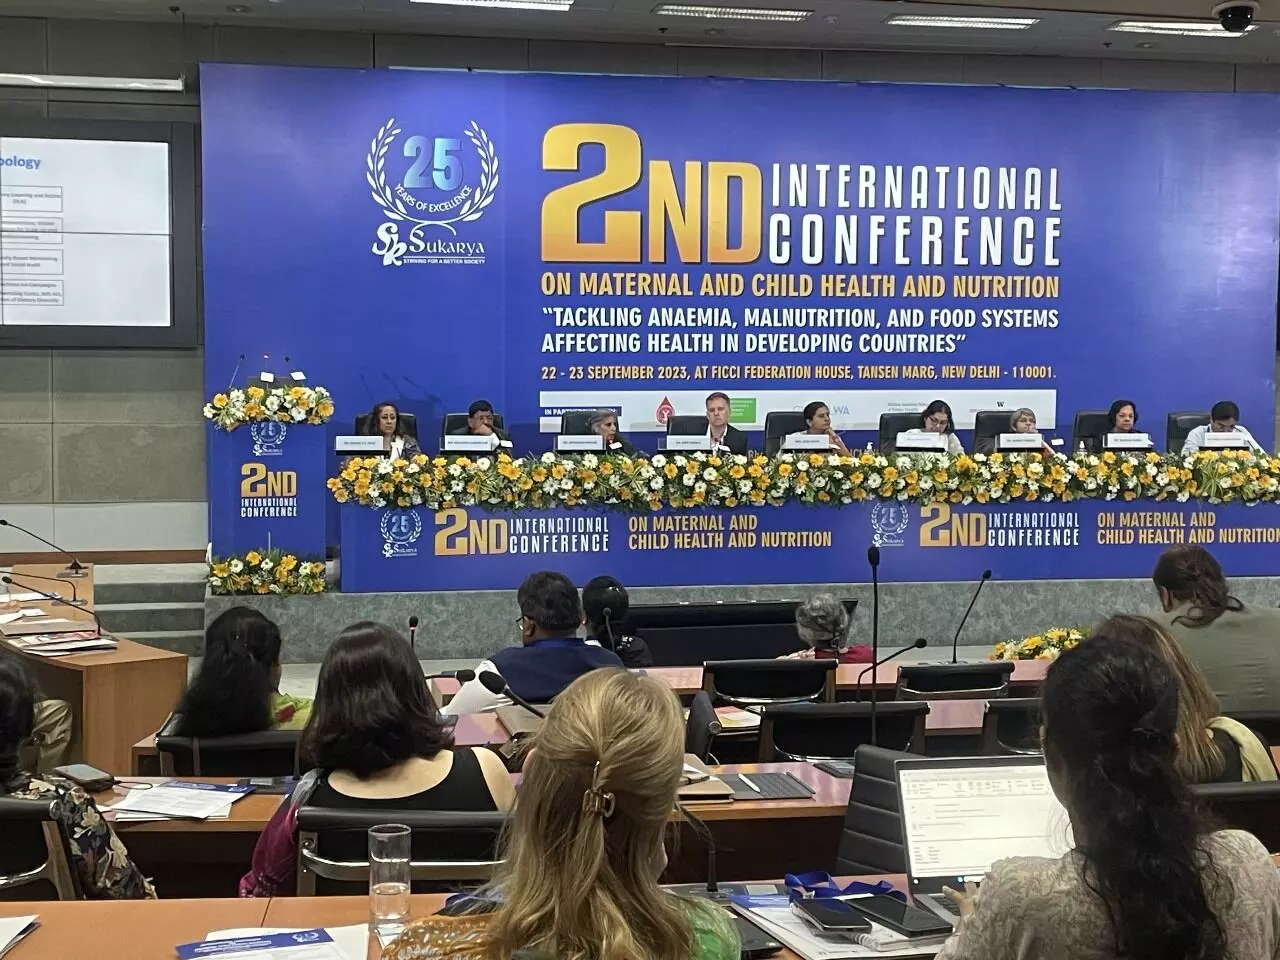 Sukarya Hosts Historic Maternal Child Health & Nutrition Conference to Combat Anaemia and Malnutrition